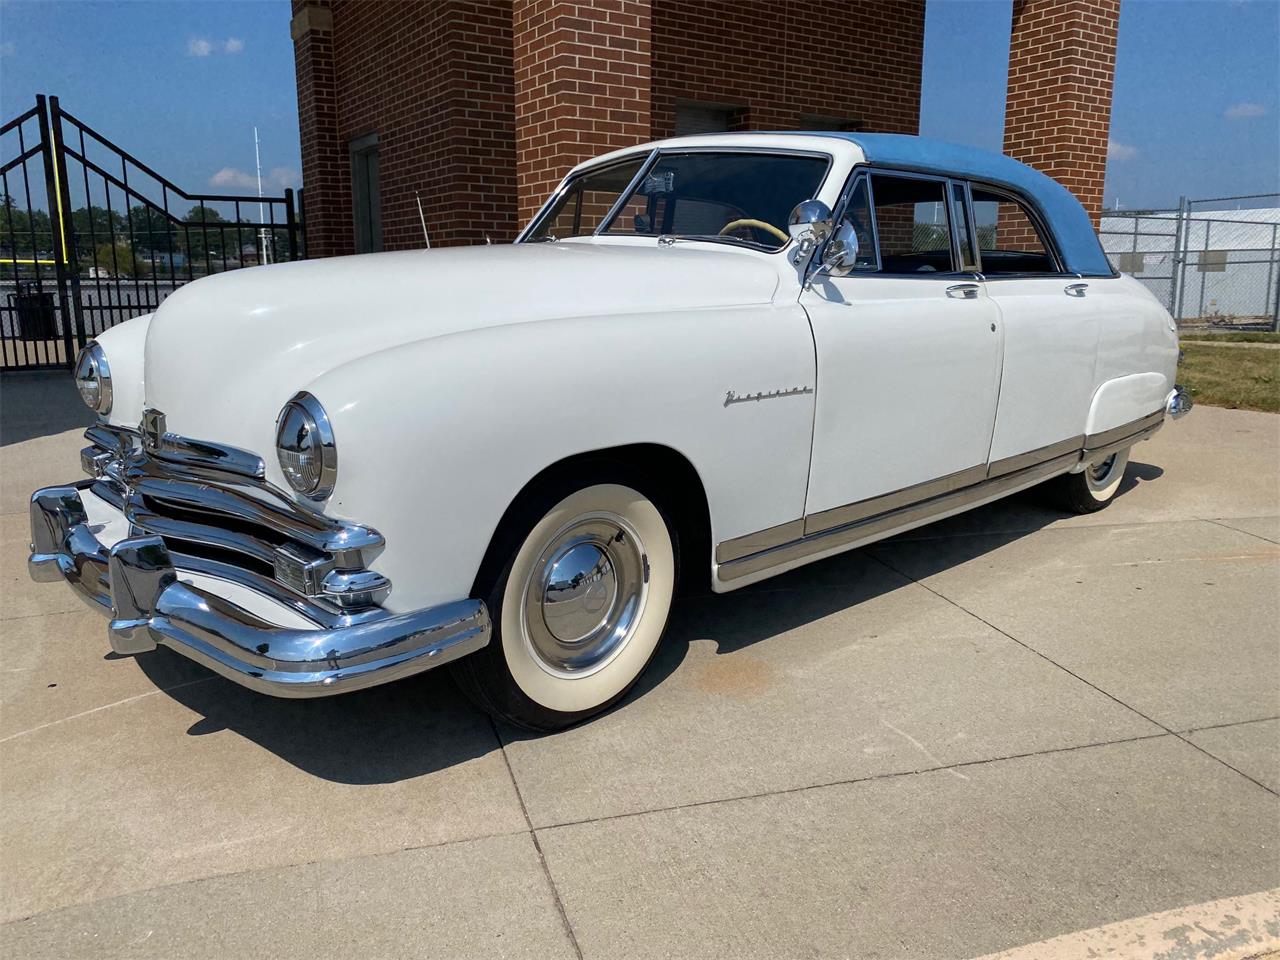 Pick of the Day: 1949 Kaiser Virginian